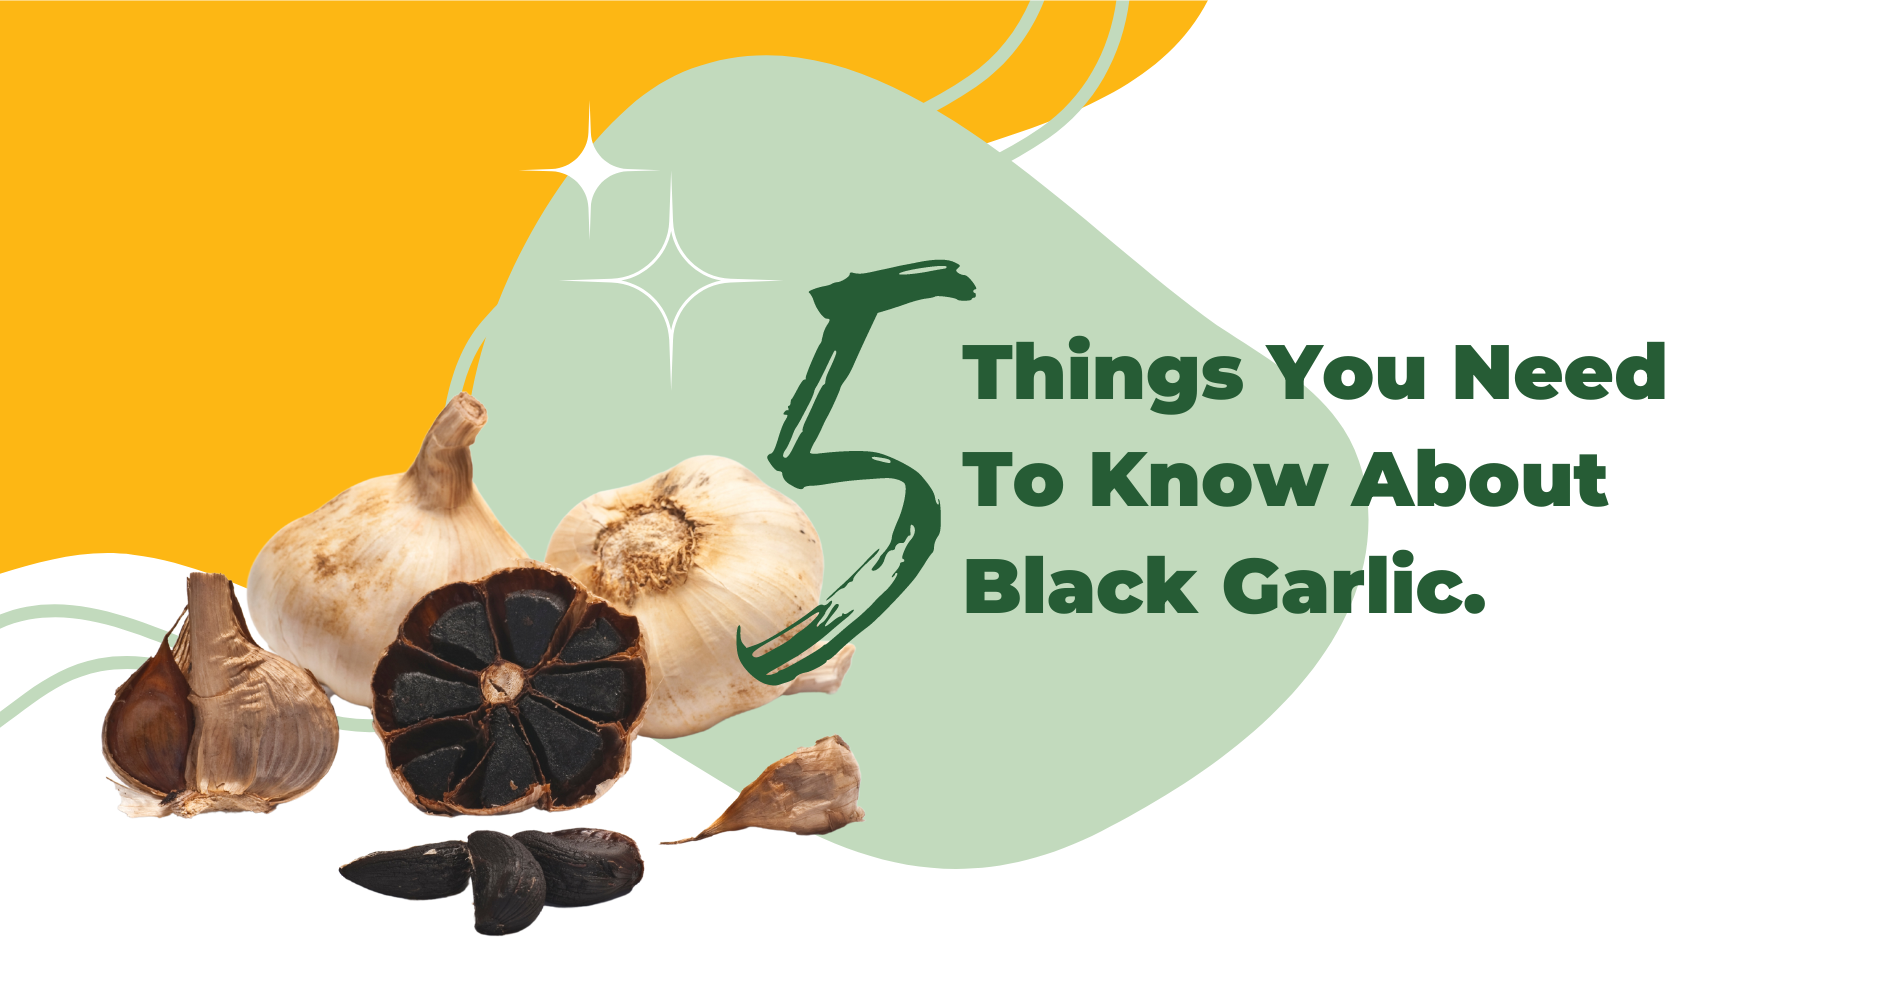 5 Things You Need To Know About Black Garlic image